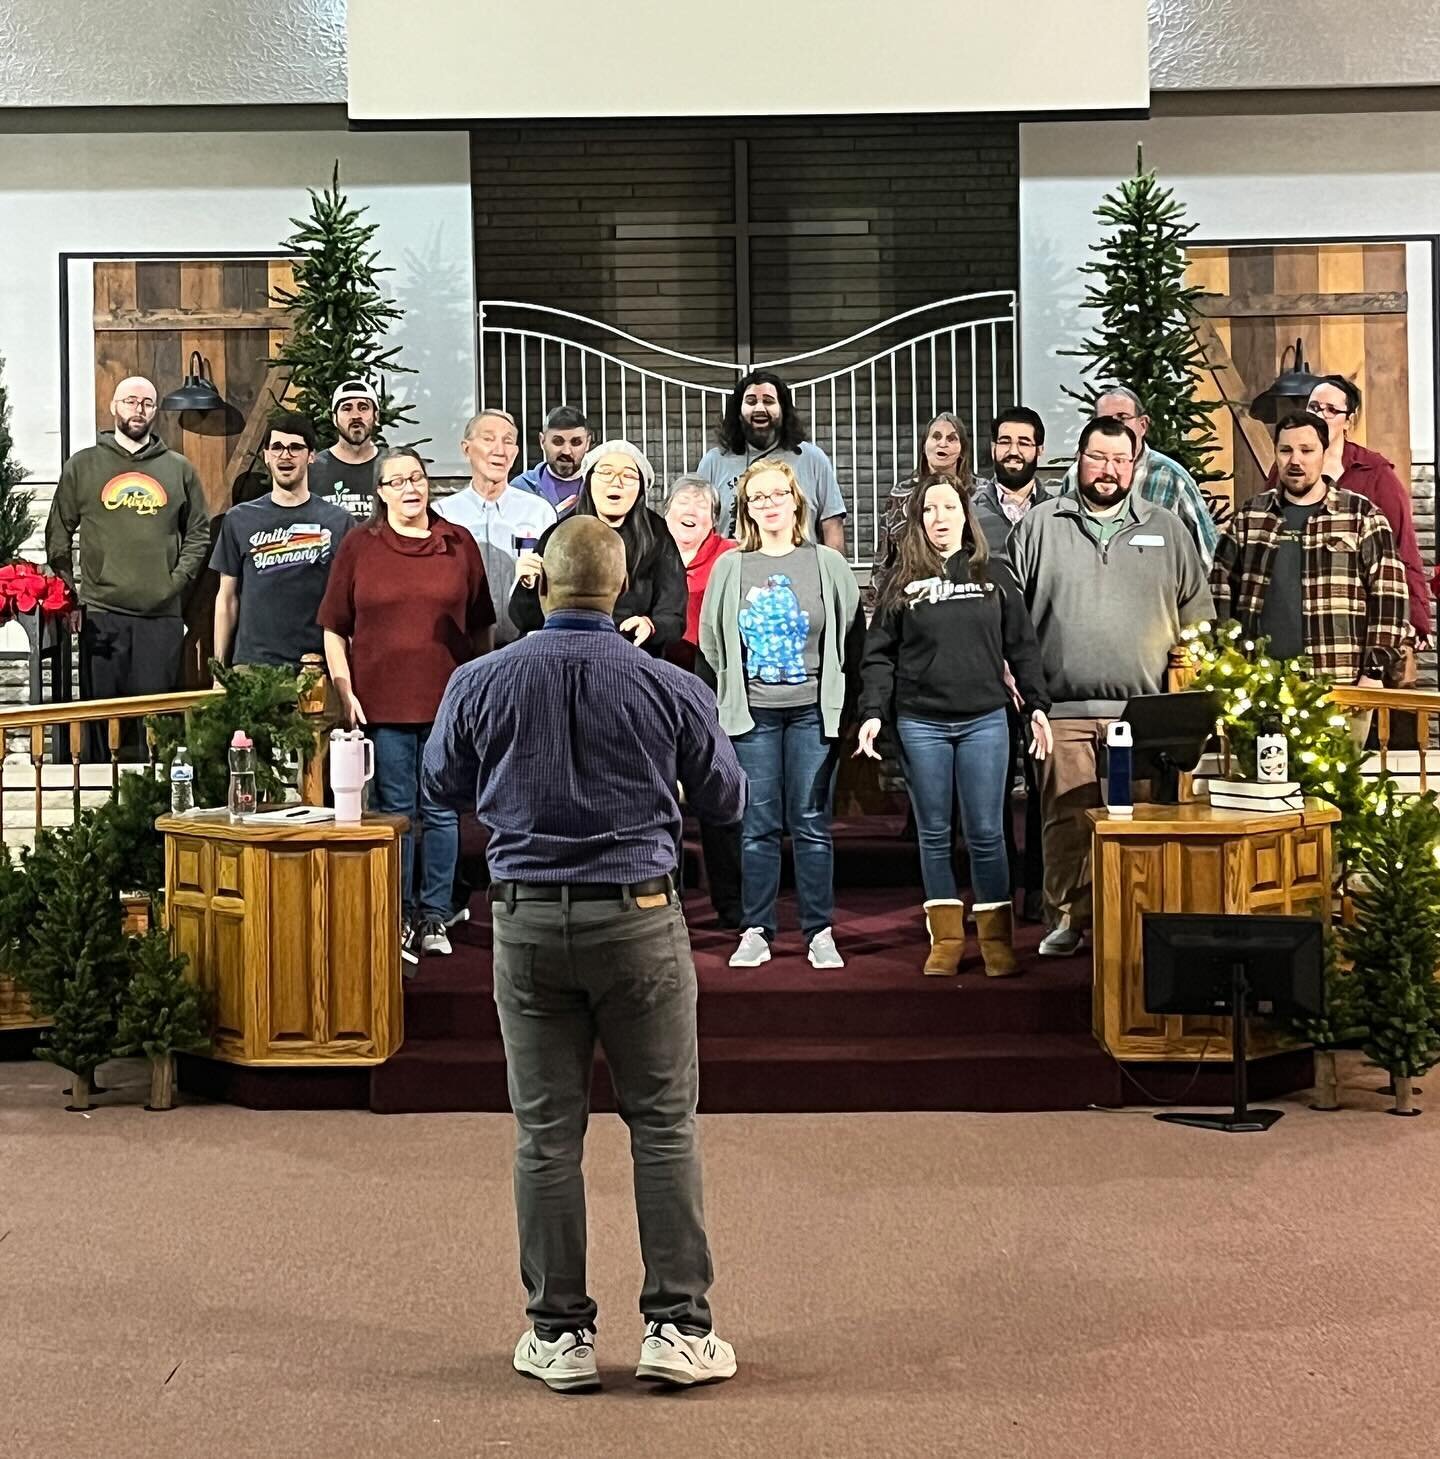 Tonight was our final rehearsal before our holiday show THIS SATURDAY at 7 pm, Spring Road Church of Christ, 74 S Spring Road, Westerville, OH 43081. FREE ADMISSION!! We hope to see you there!!

#AllVoices #AllAreWelcome #AllVoiceChorus #BarbershopCh